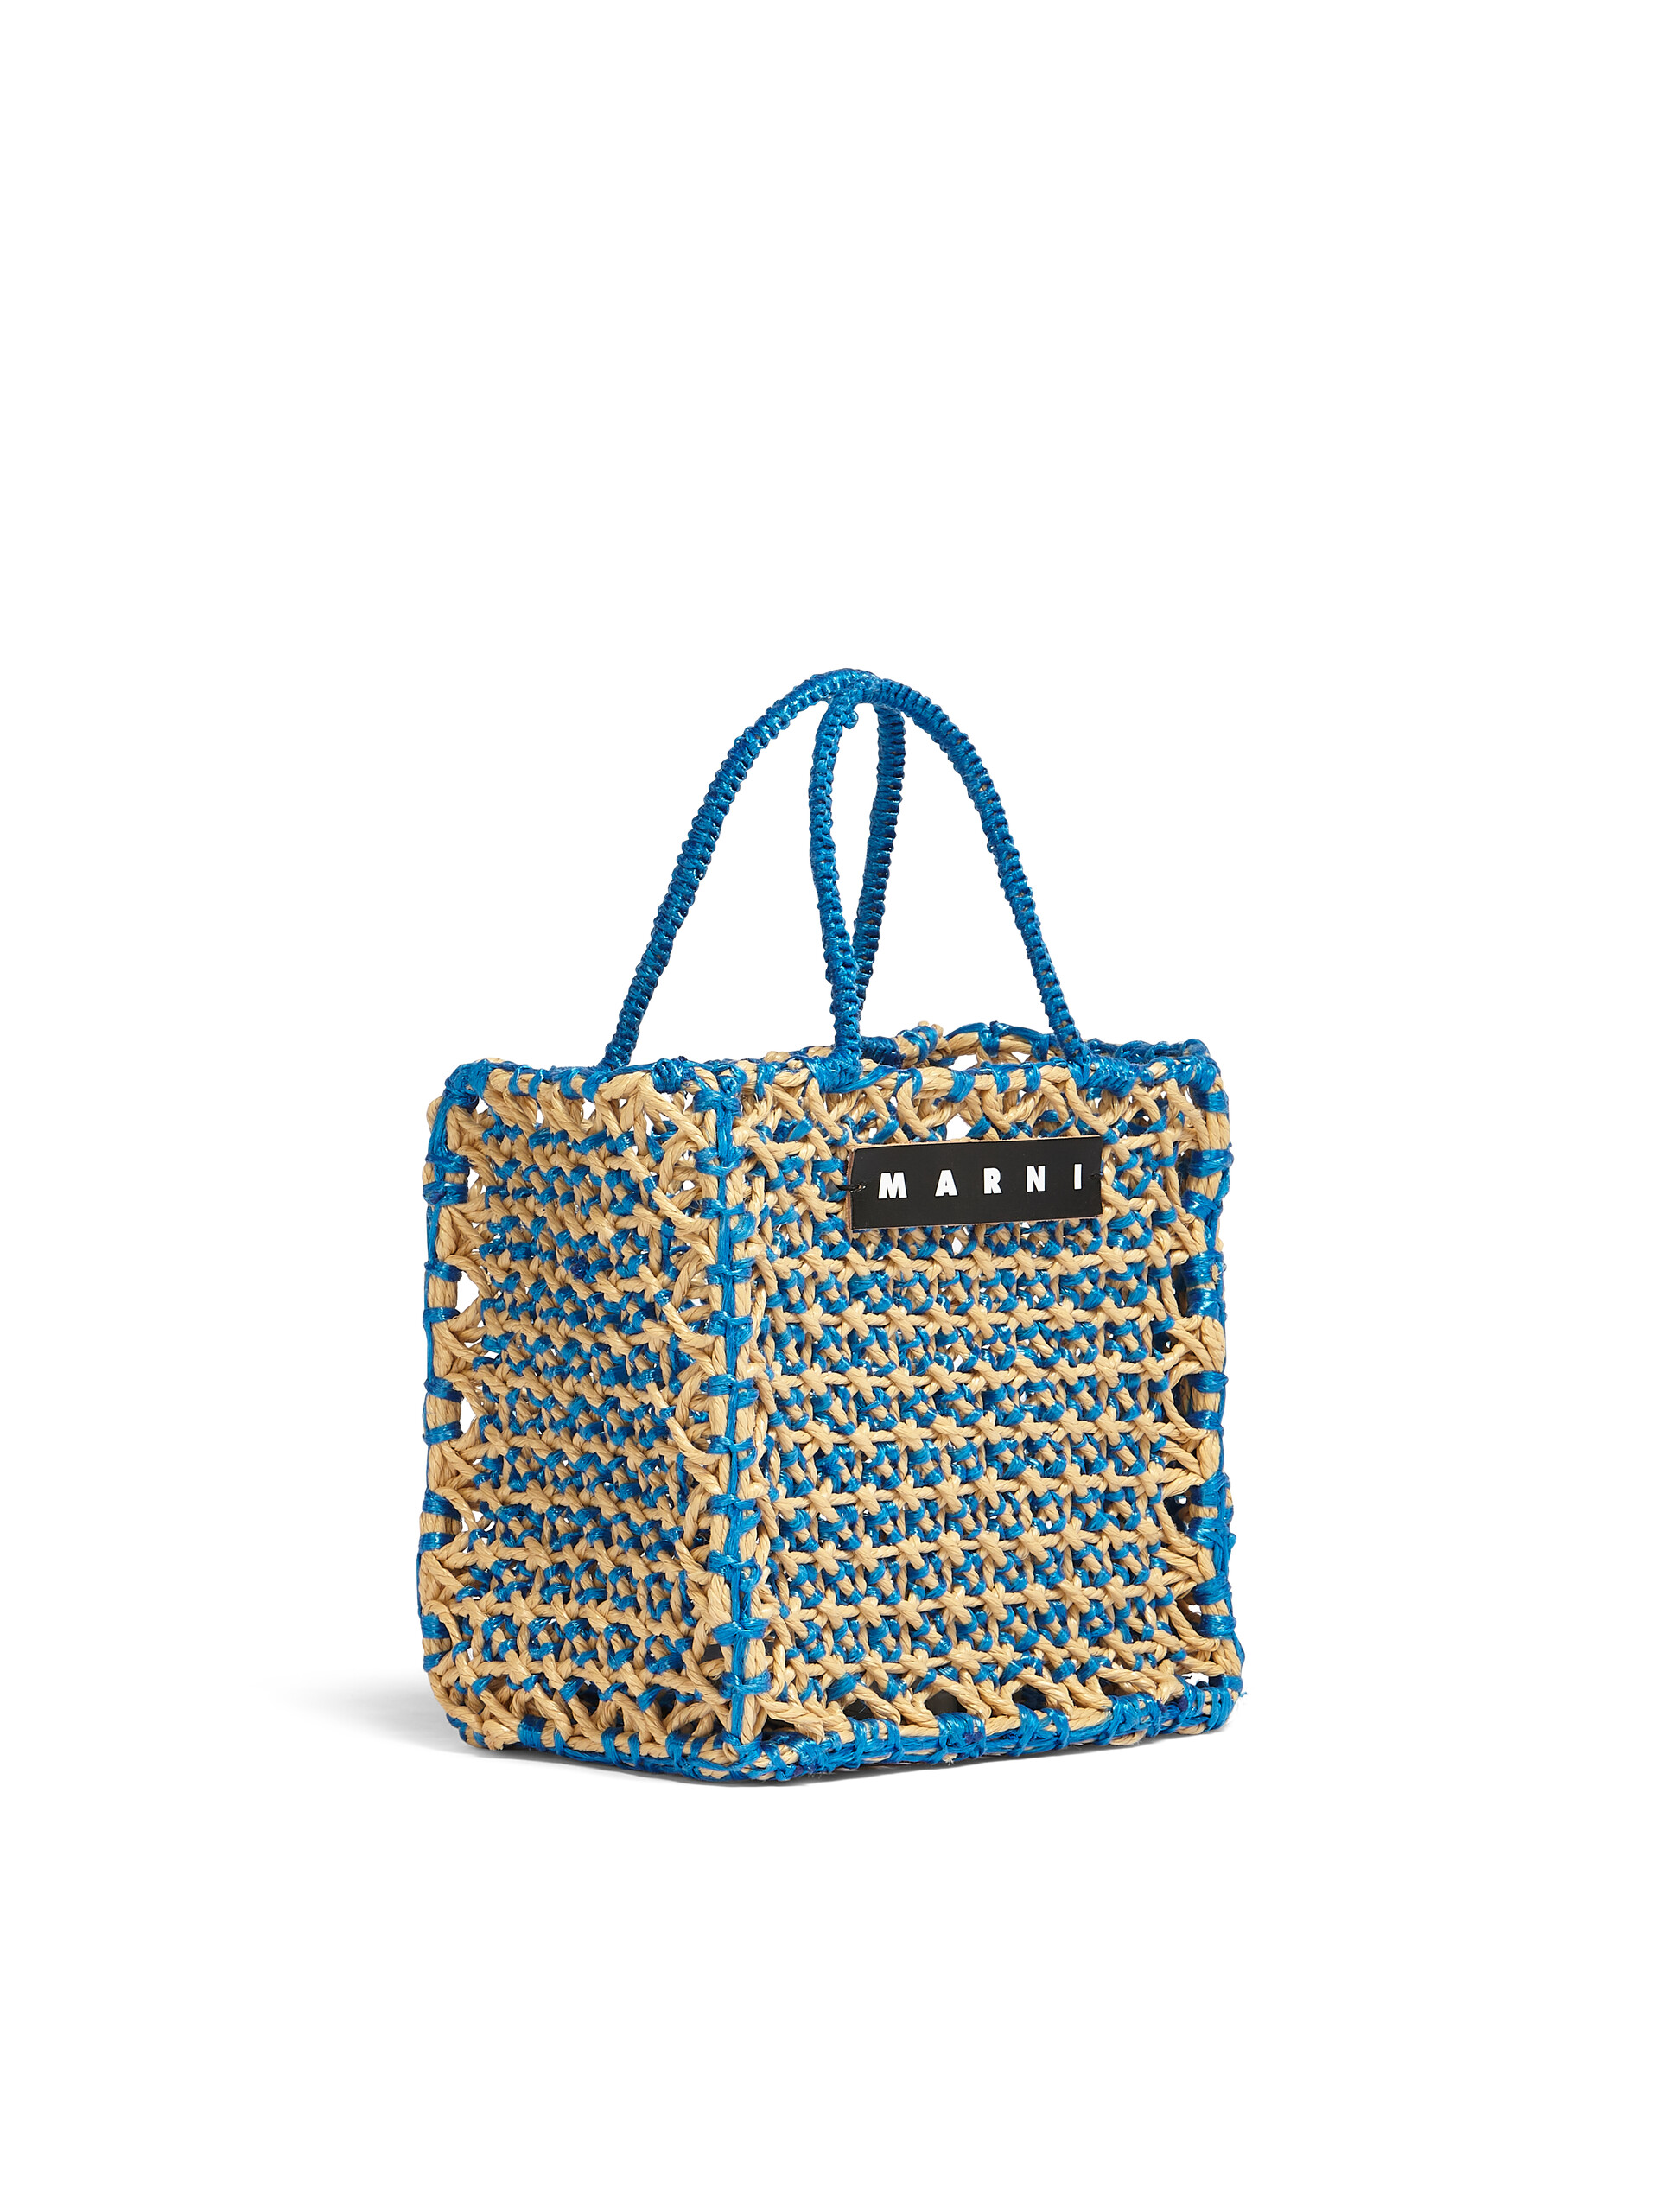 MARNI MARKET small bag in pale blue and beige crochet - Bags - Image 2